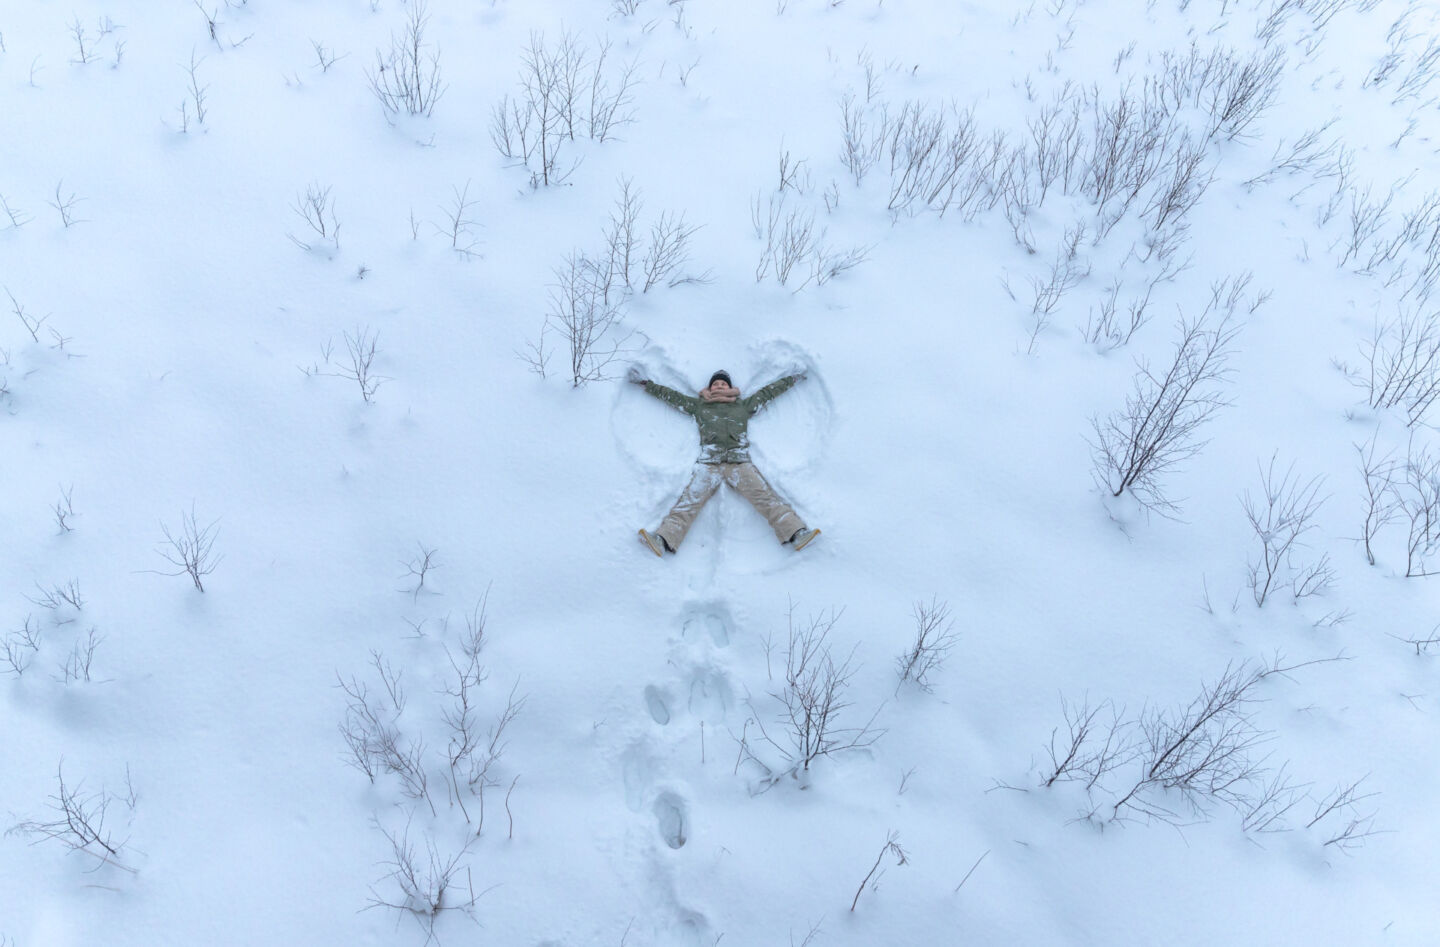 Snow angels, just one of the many ways to have fun with snow in Finnish Lapland